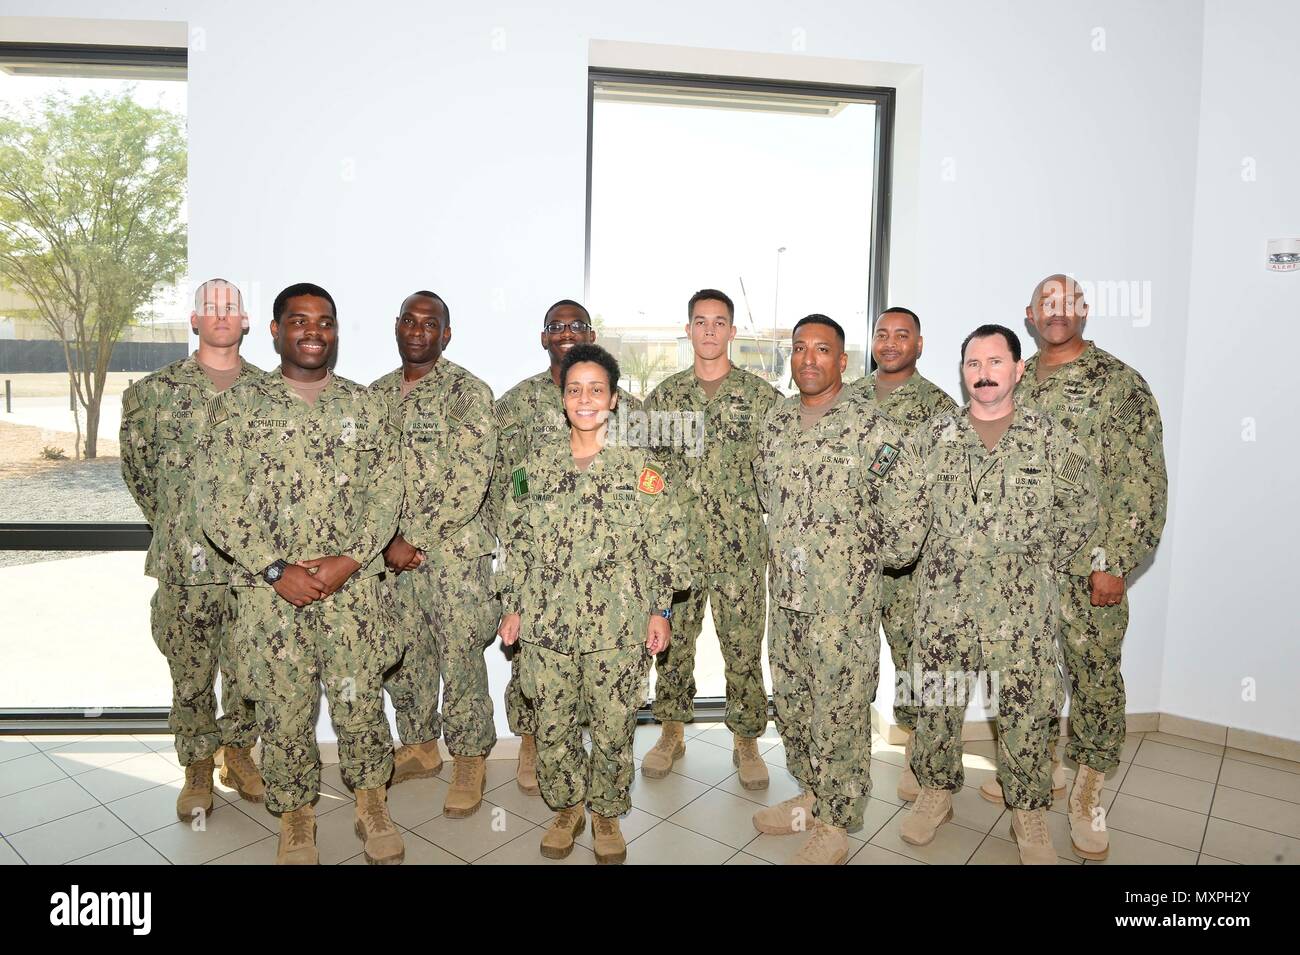 161121-N-HX127-127 CAMP LEMONNIER (Nov. 21, 2016) Commander, U.S. Naval Forces Europe-Africa /Commander, Allied Joint Force Command Naples, Adm. Michelle Howard, center, and U.S. Naval Forces Europe-Africa Fleet Master Chief Raymond D. Kemp Sr., right rear, meet with Sailor of the Year winners from Coastal Riverine Squadron 11 and Combined Joint Task Force, Horn of Africa Nov. 21, 2016. U.S. Naval Forces Europe-Africa, headquartered in Naples, Italy, oversees joint and naval operations, often in concert with allied, joint, and interagency partners, to enable enduring relationships, and increas Stock Photo